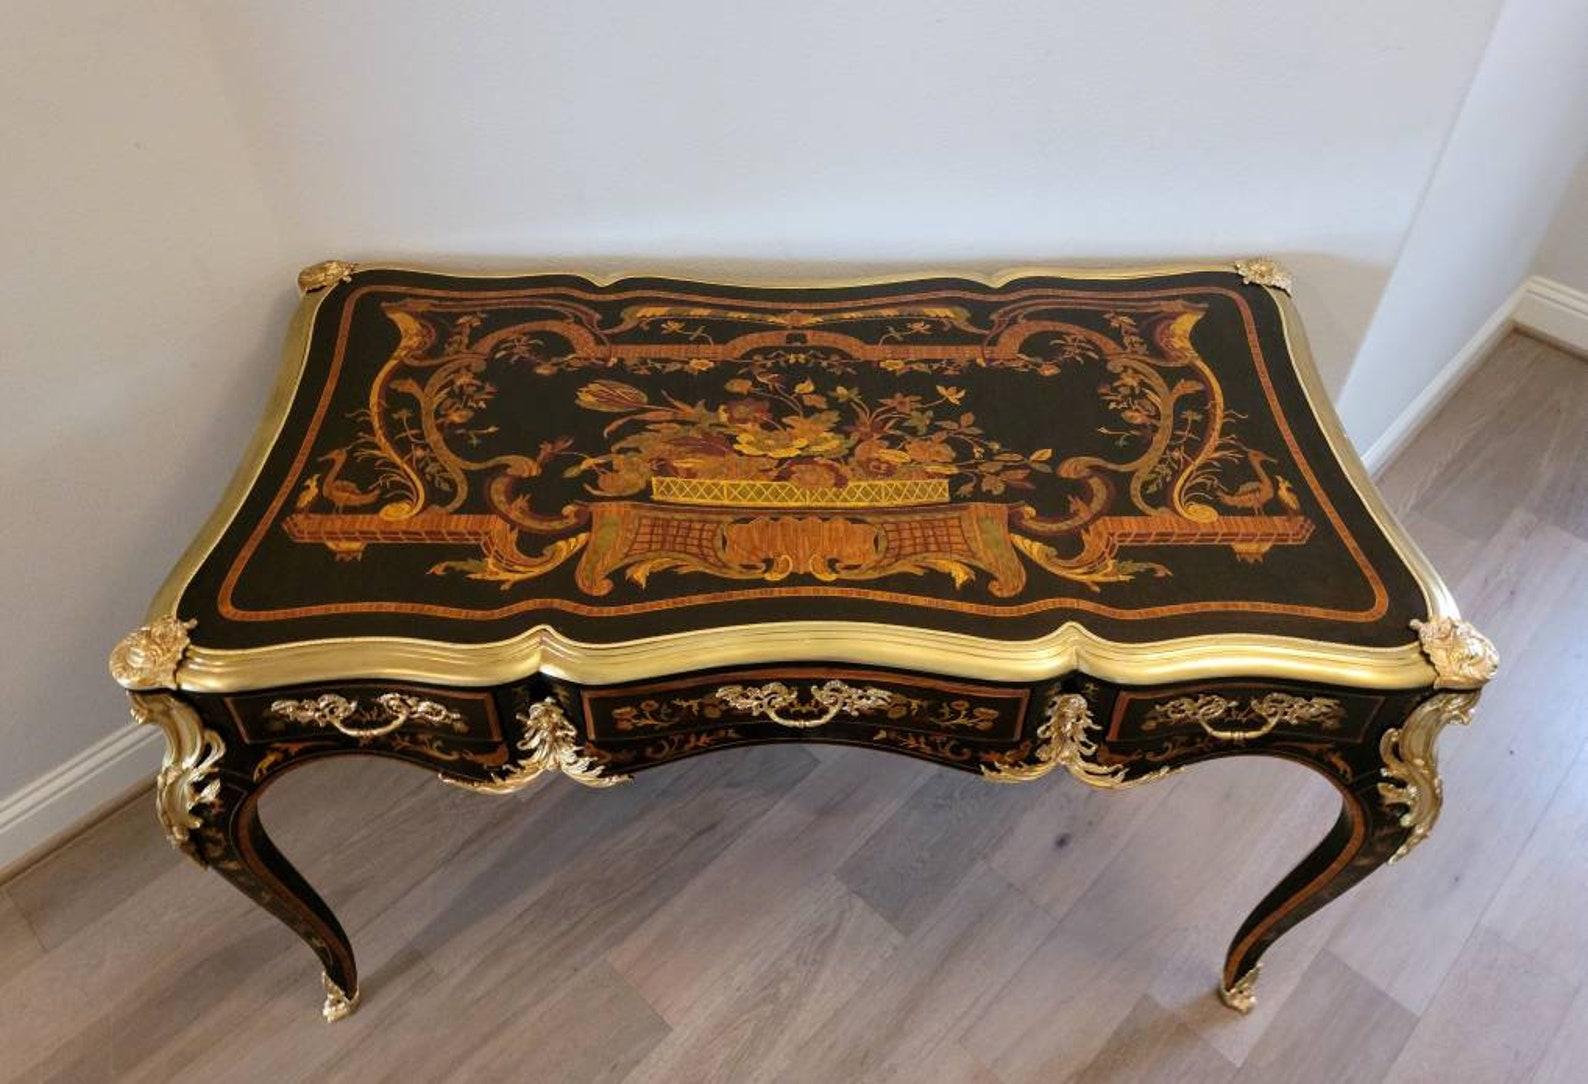 French Perfection! A most impressive and very fine quality vintage Louis XV style ormolu mounted marquetry inlaid bureau plat. 

Exquisitely hand-crafted in the manner of important French master ébéniste Jacques Dubois (1694-1763). Cabinetmaker to